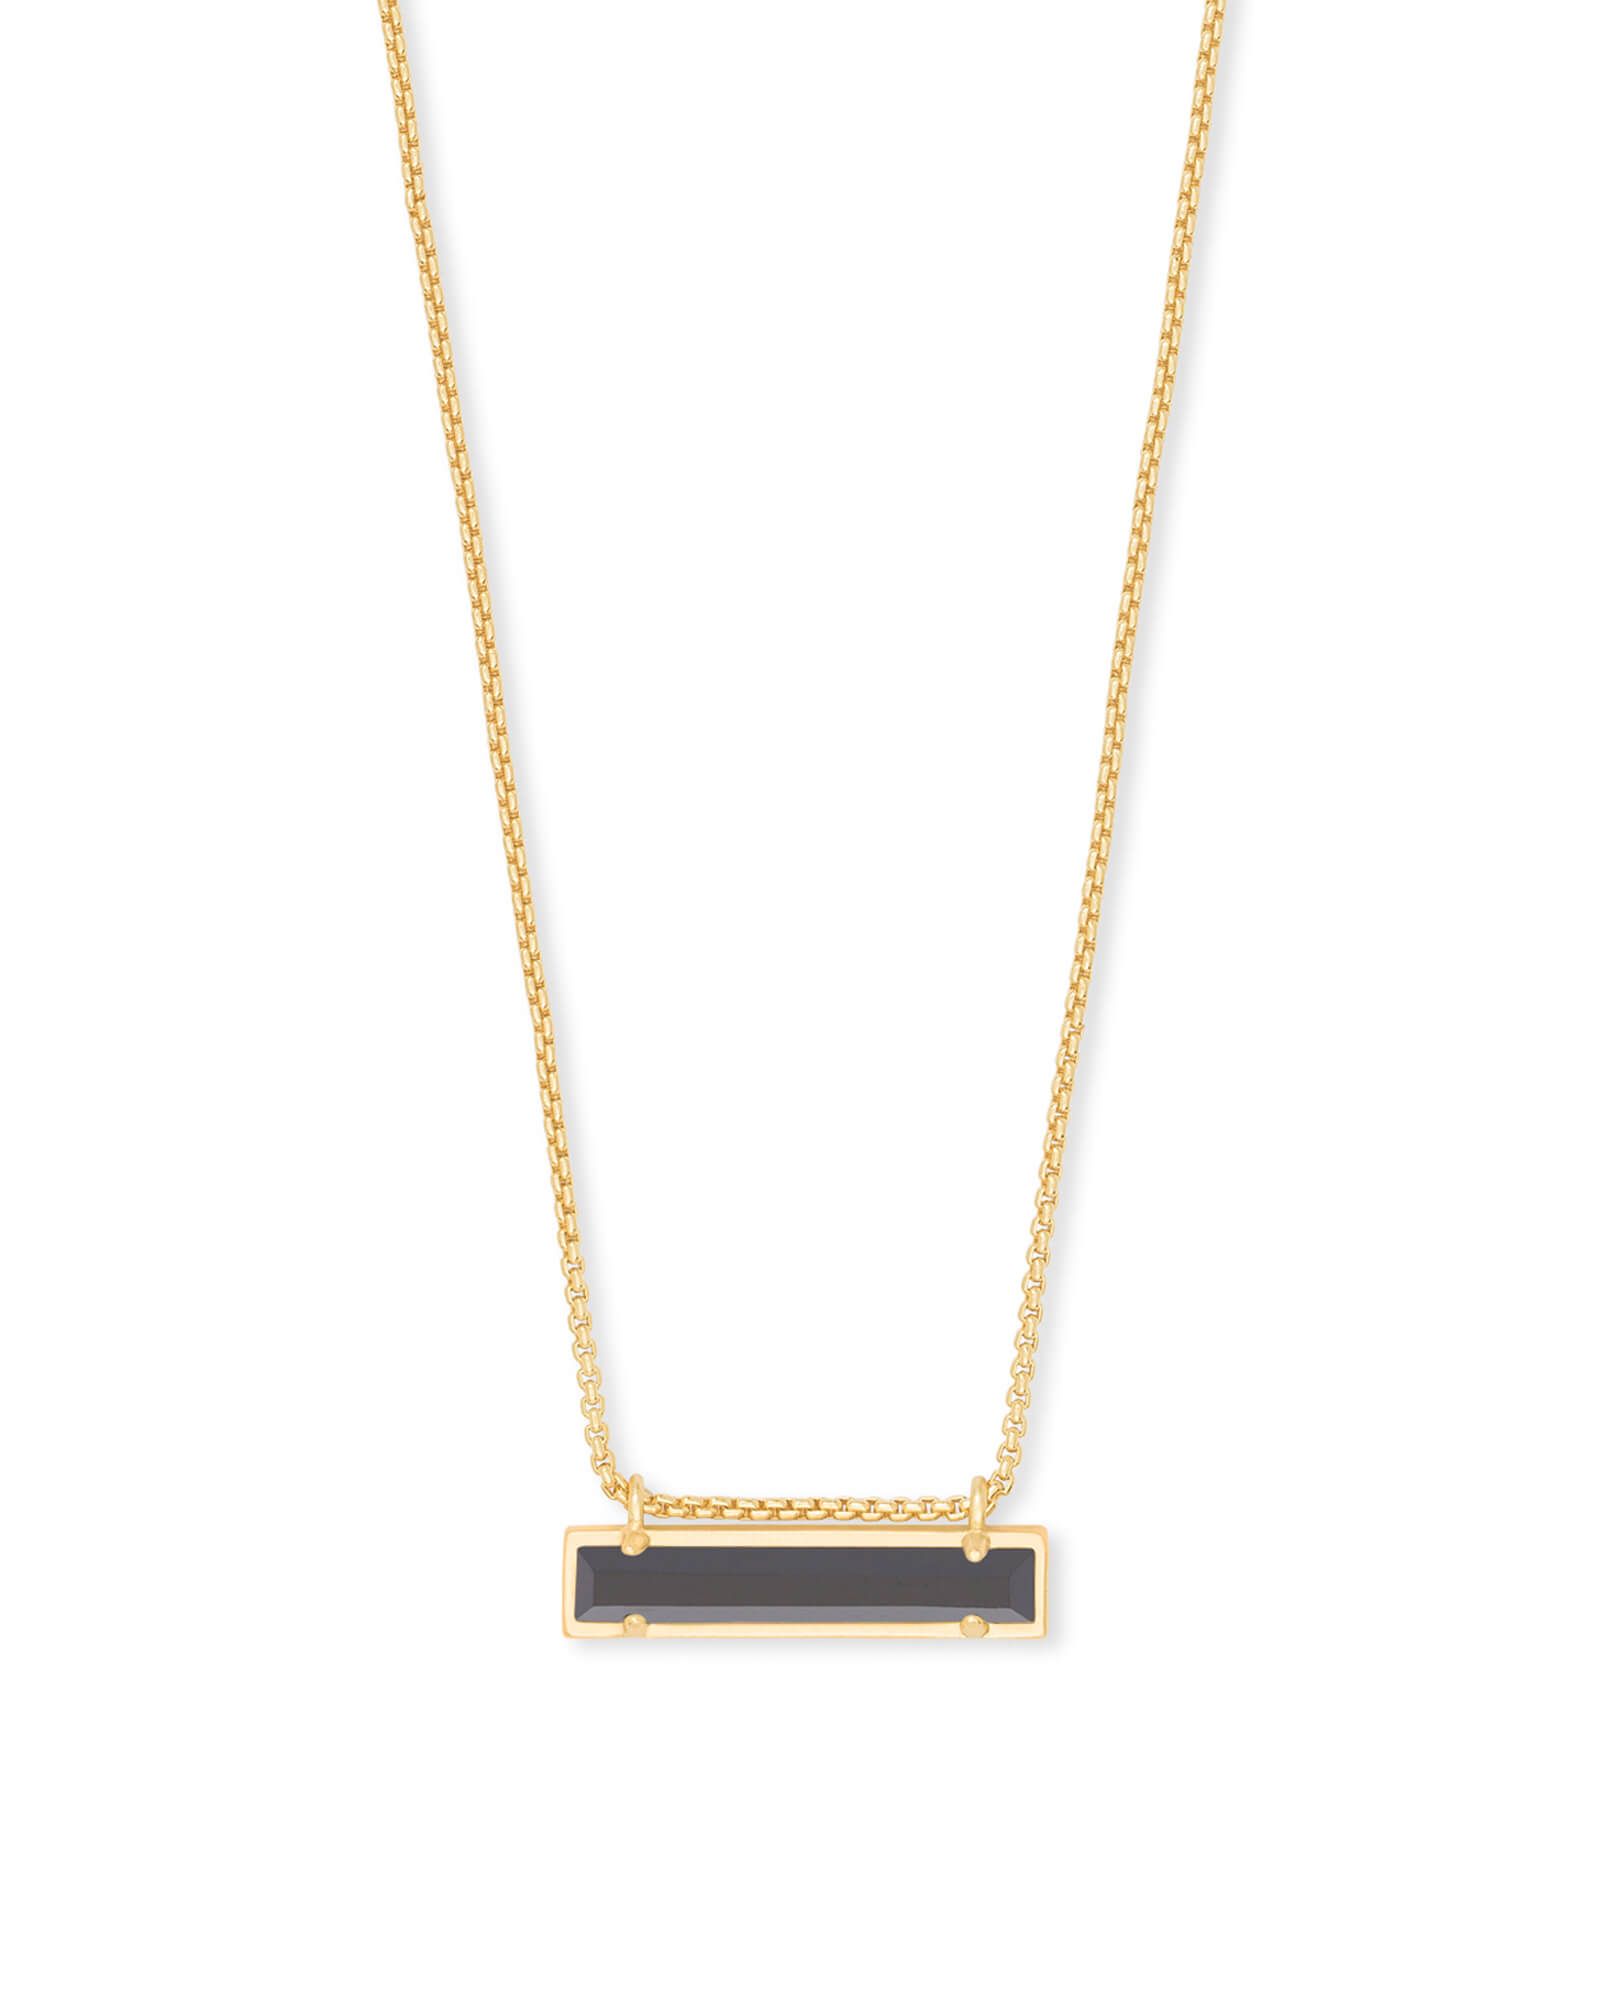 Leanor Gold Pendant Necklace in Black Opaque Glass | Kendra Scott